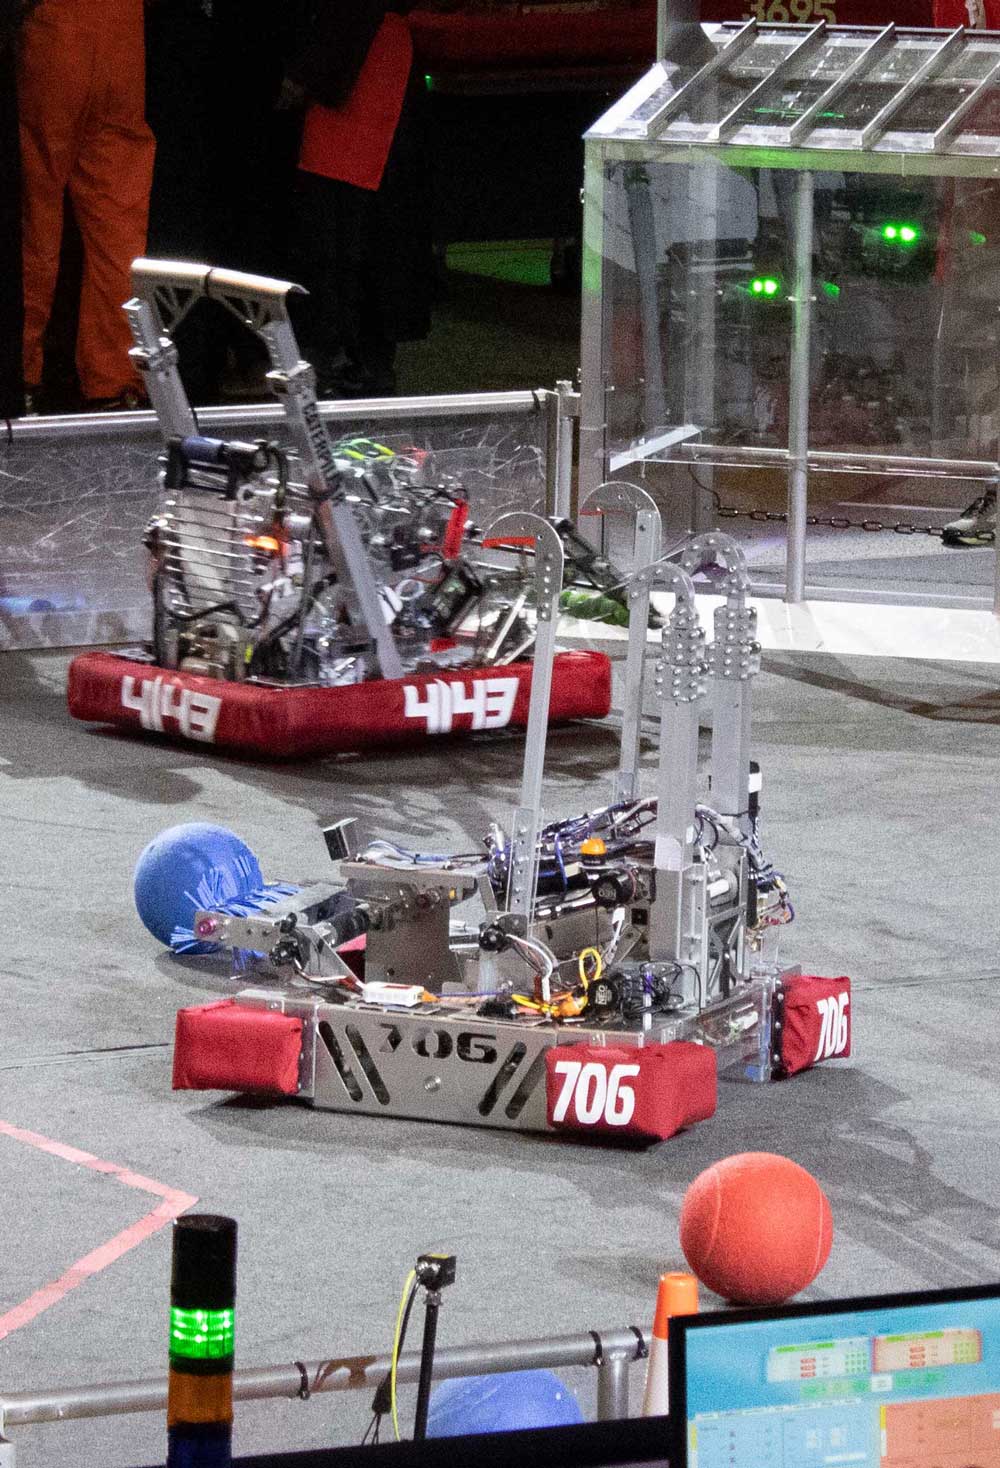 cyberhawks706 robot at the arena